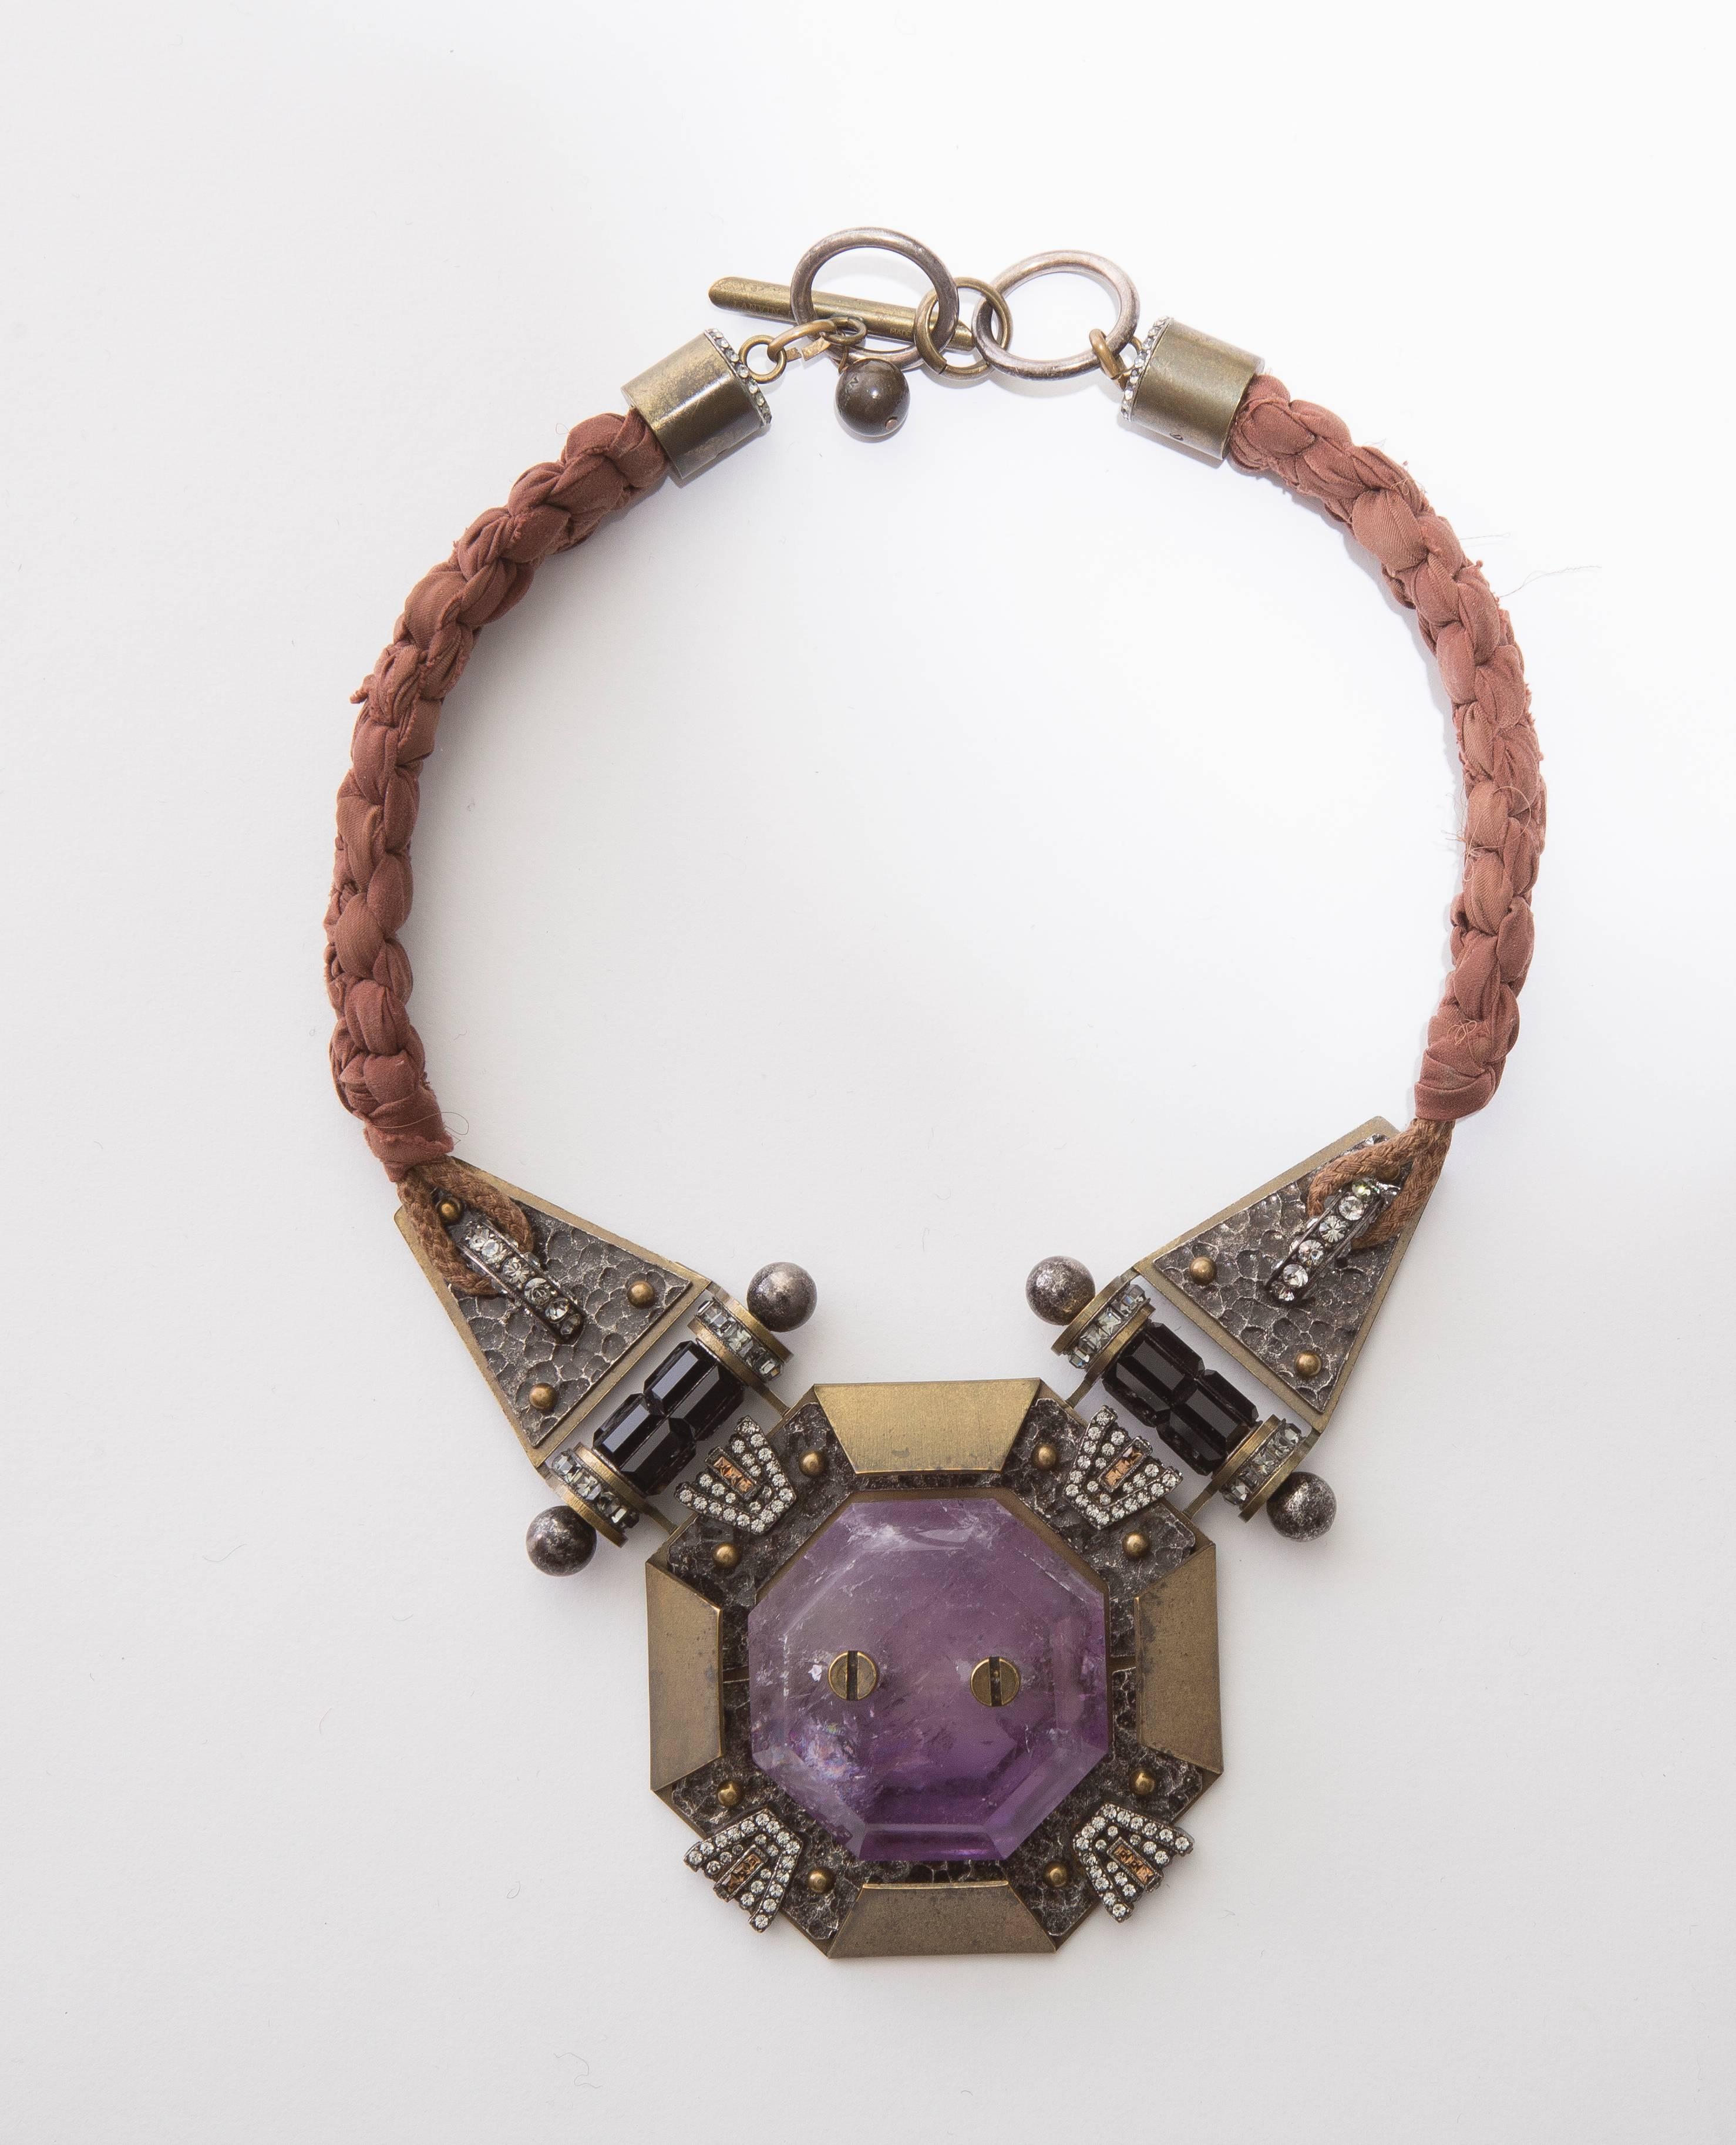  Alber Elbaz For Lanvin Silk Braided Necklace With Amethyst Center Stone 2